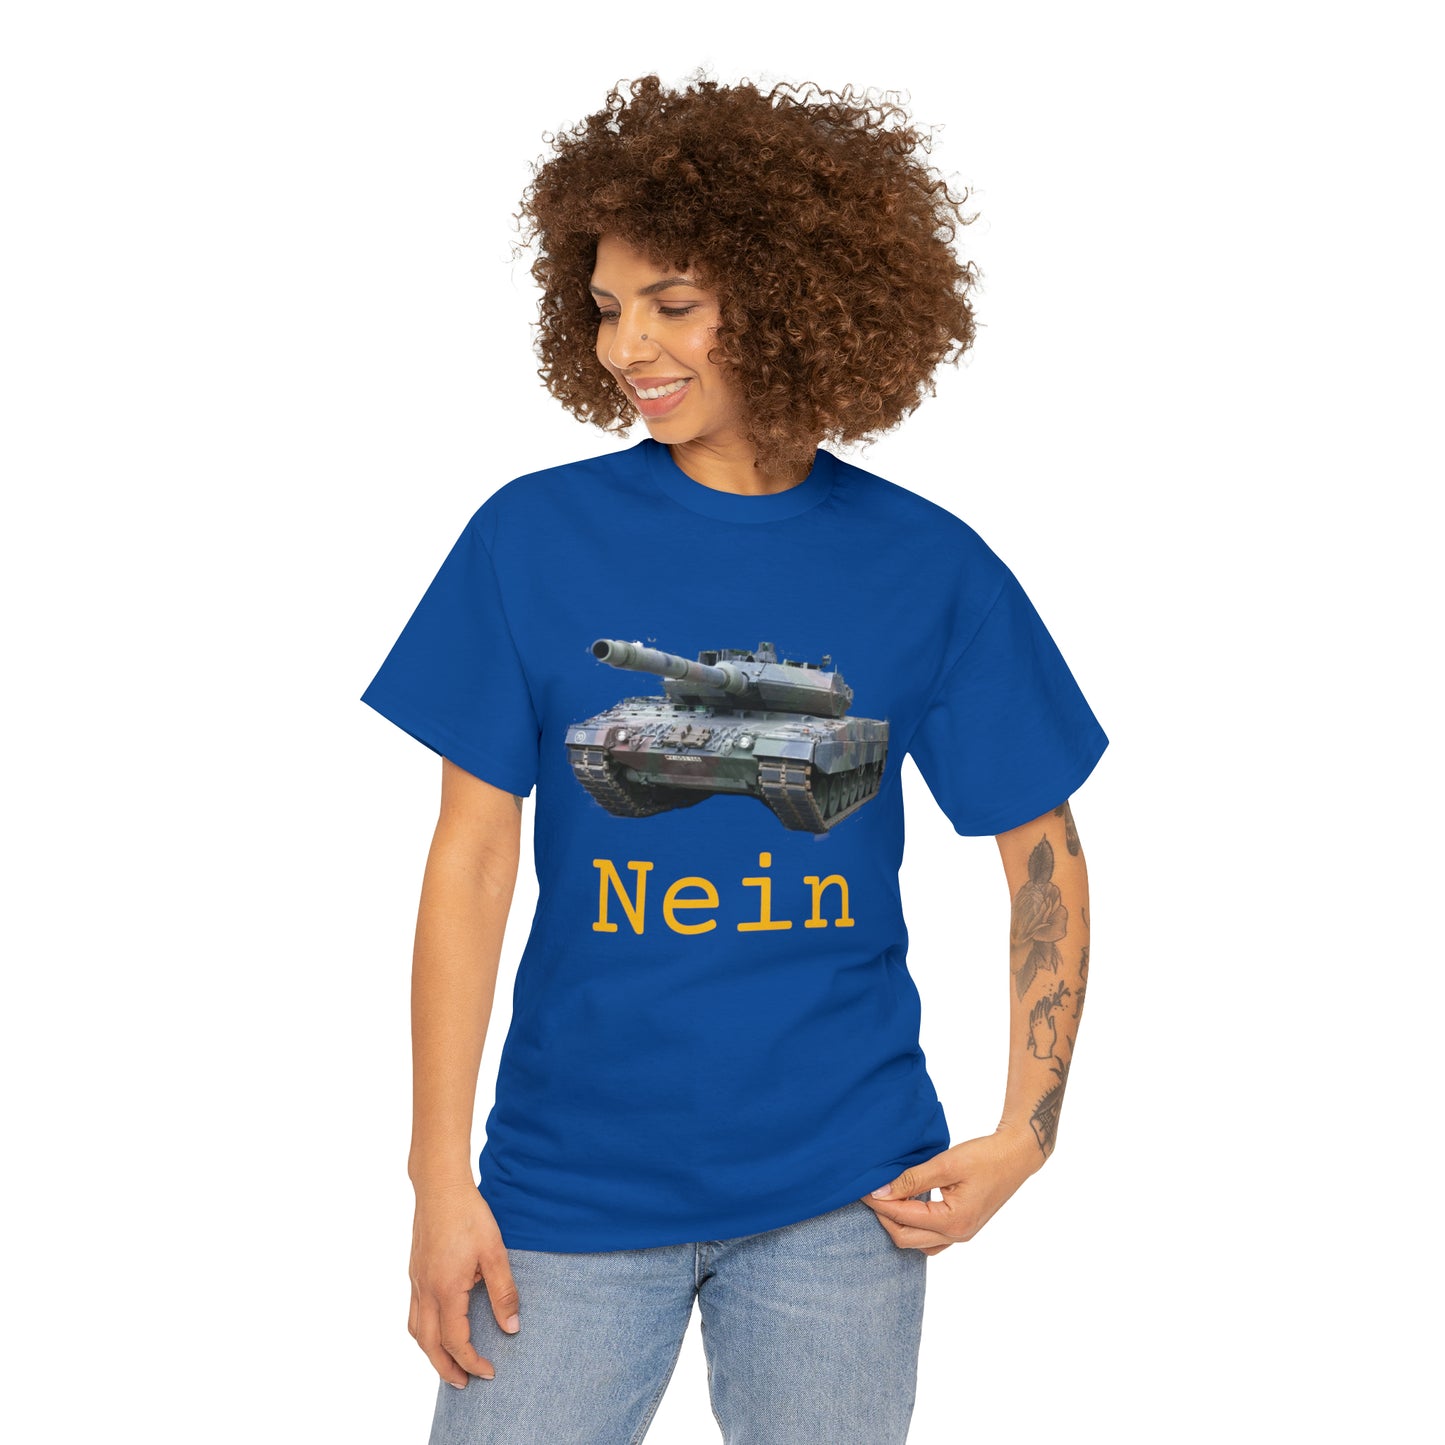 Nein Panzer Leopard 2 - Hurts Shirts Collection